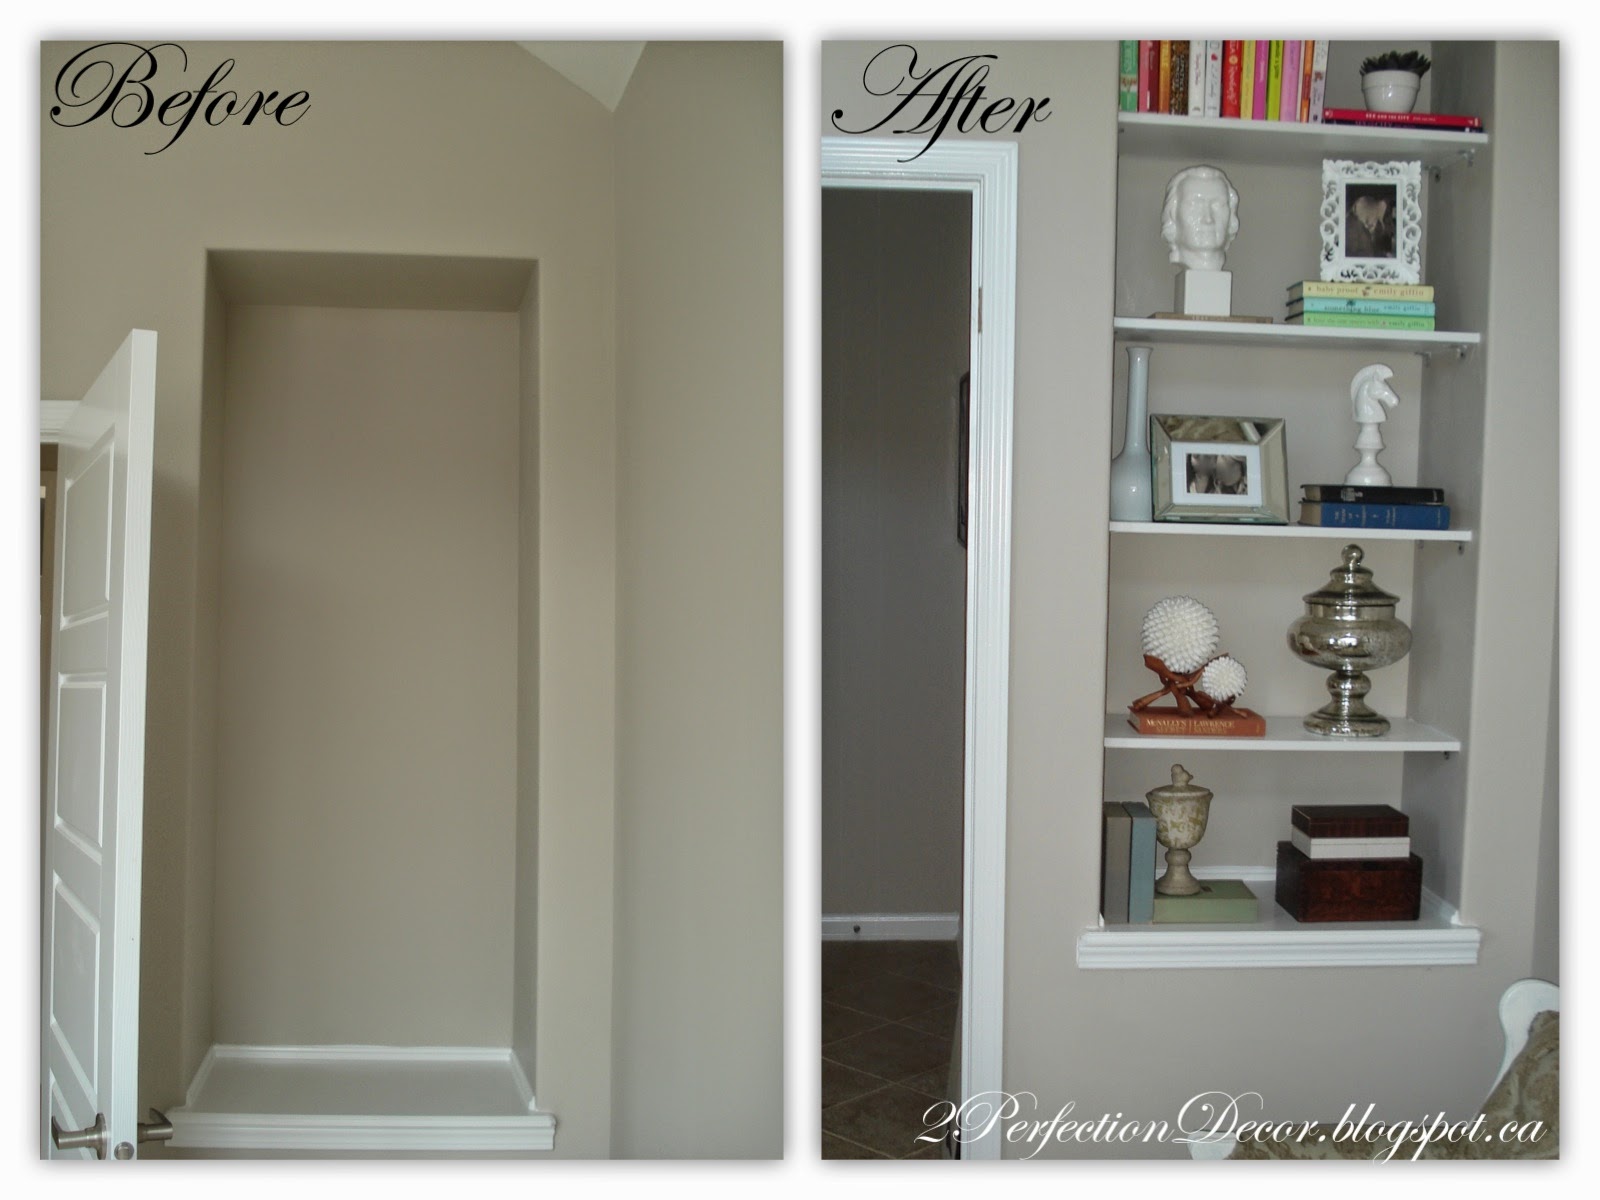 2Perfection Decor: Drywall Picture Niche turned into DIY ...